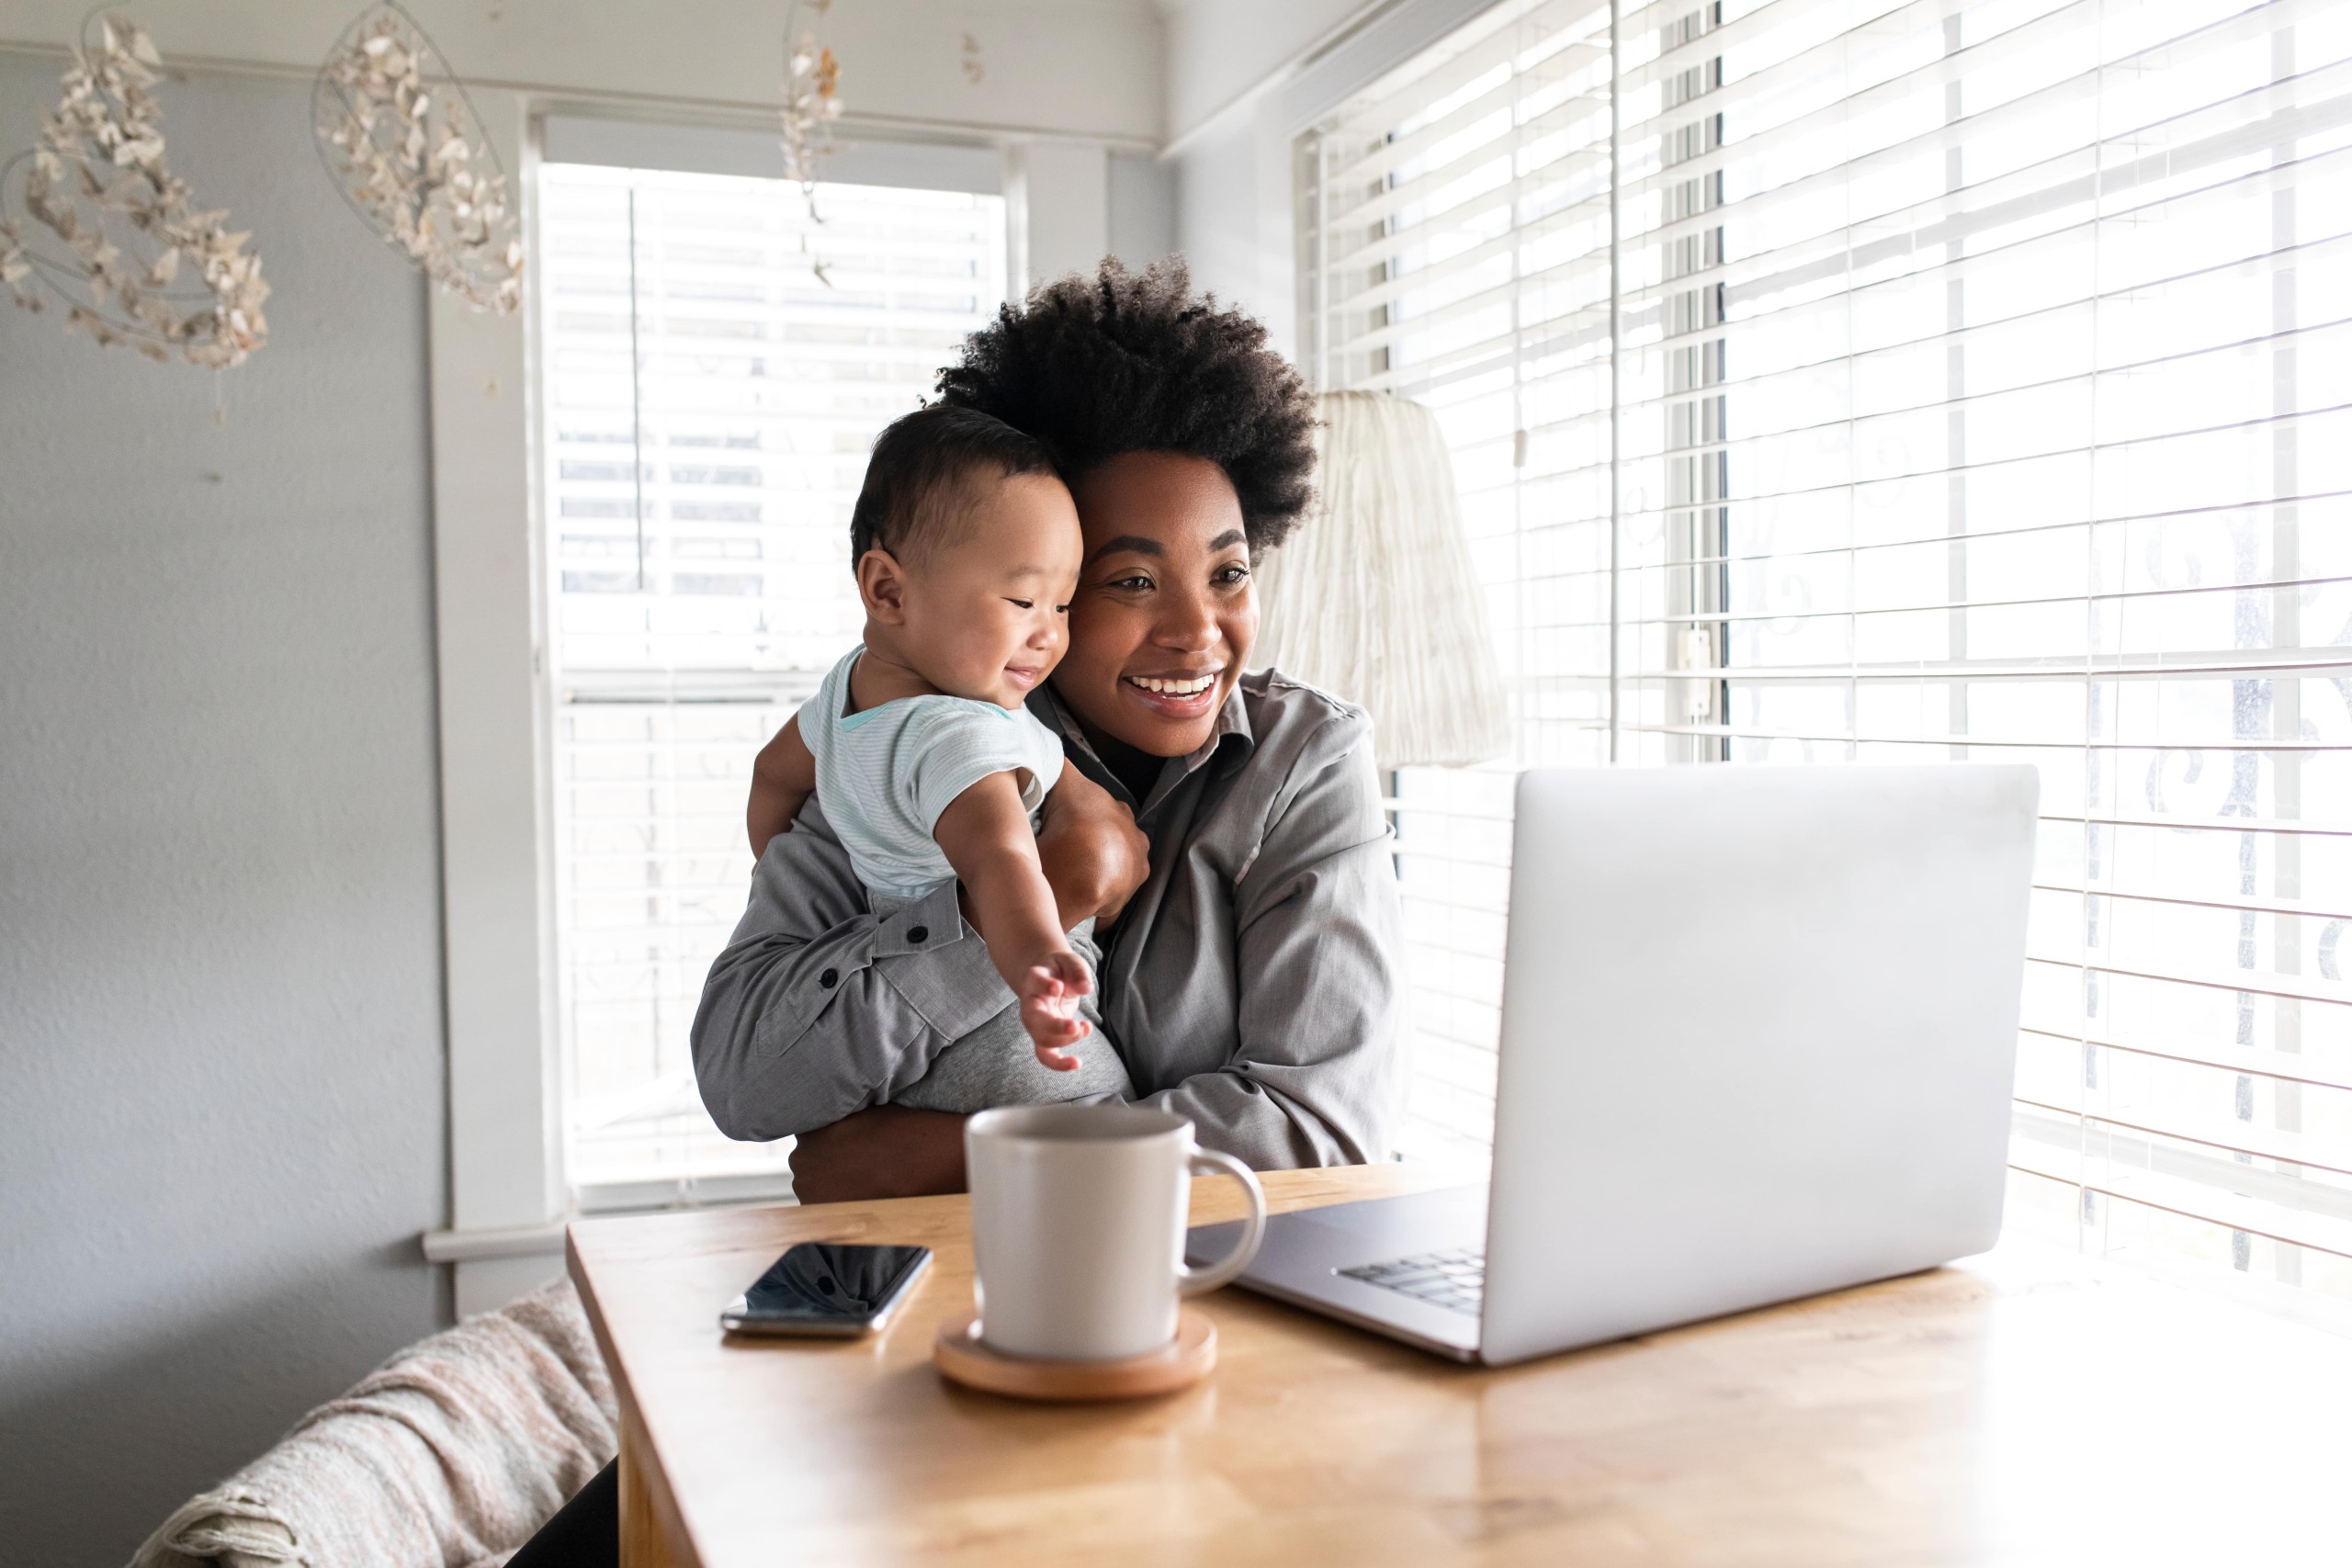 Return to Work After Maternity Leave